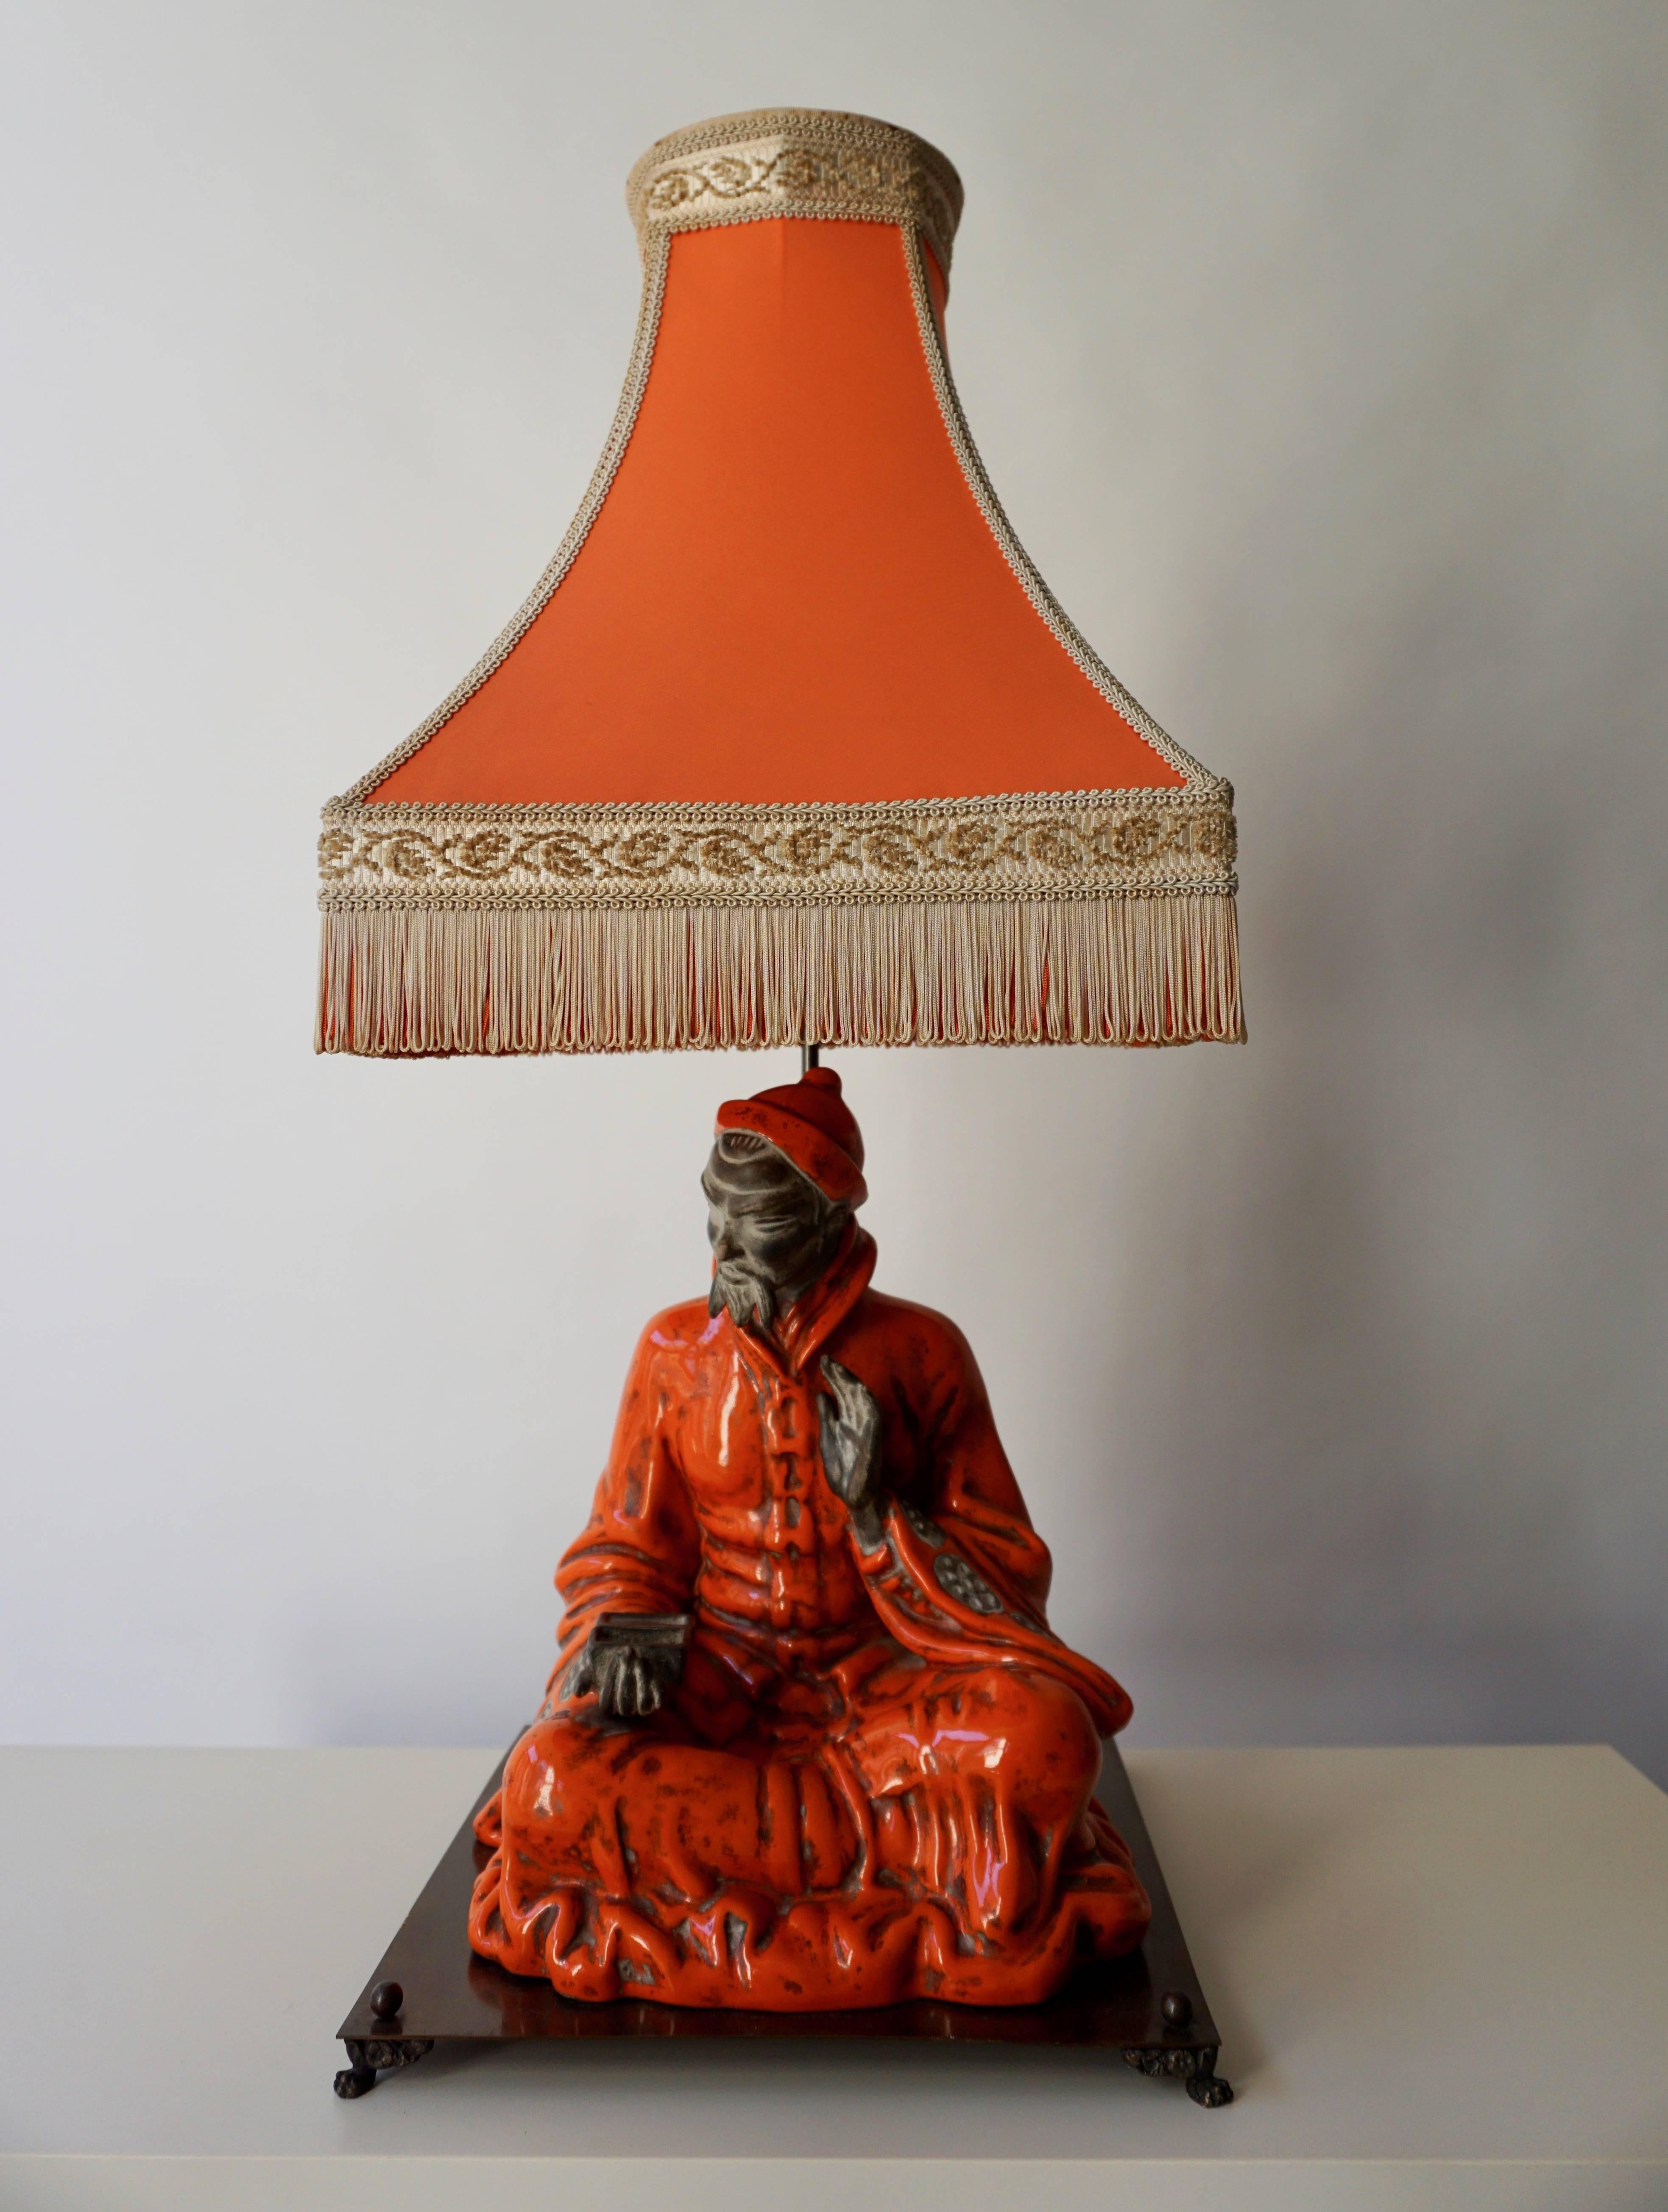 A customized ceramic table lamp of a Asian classical philosopher on a metal base.
Measures: Height table lamp with shade 77 cm.
Height philosopher 37 cm, width 30 cm, depth 30 cm.